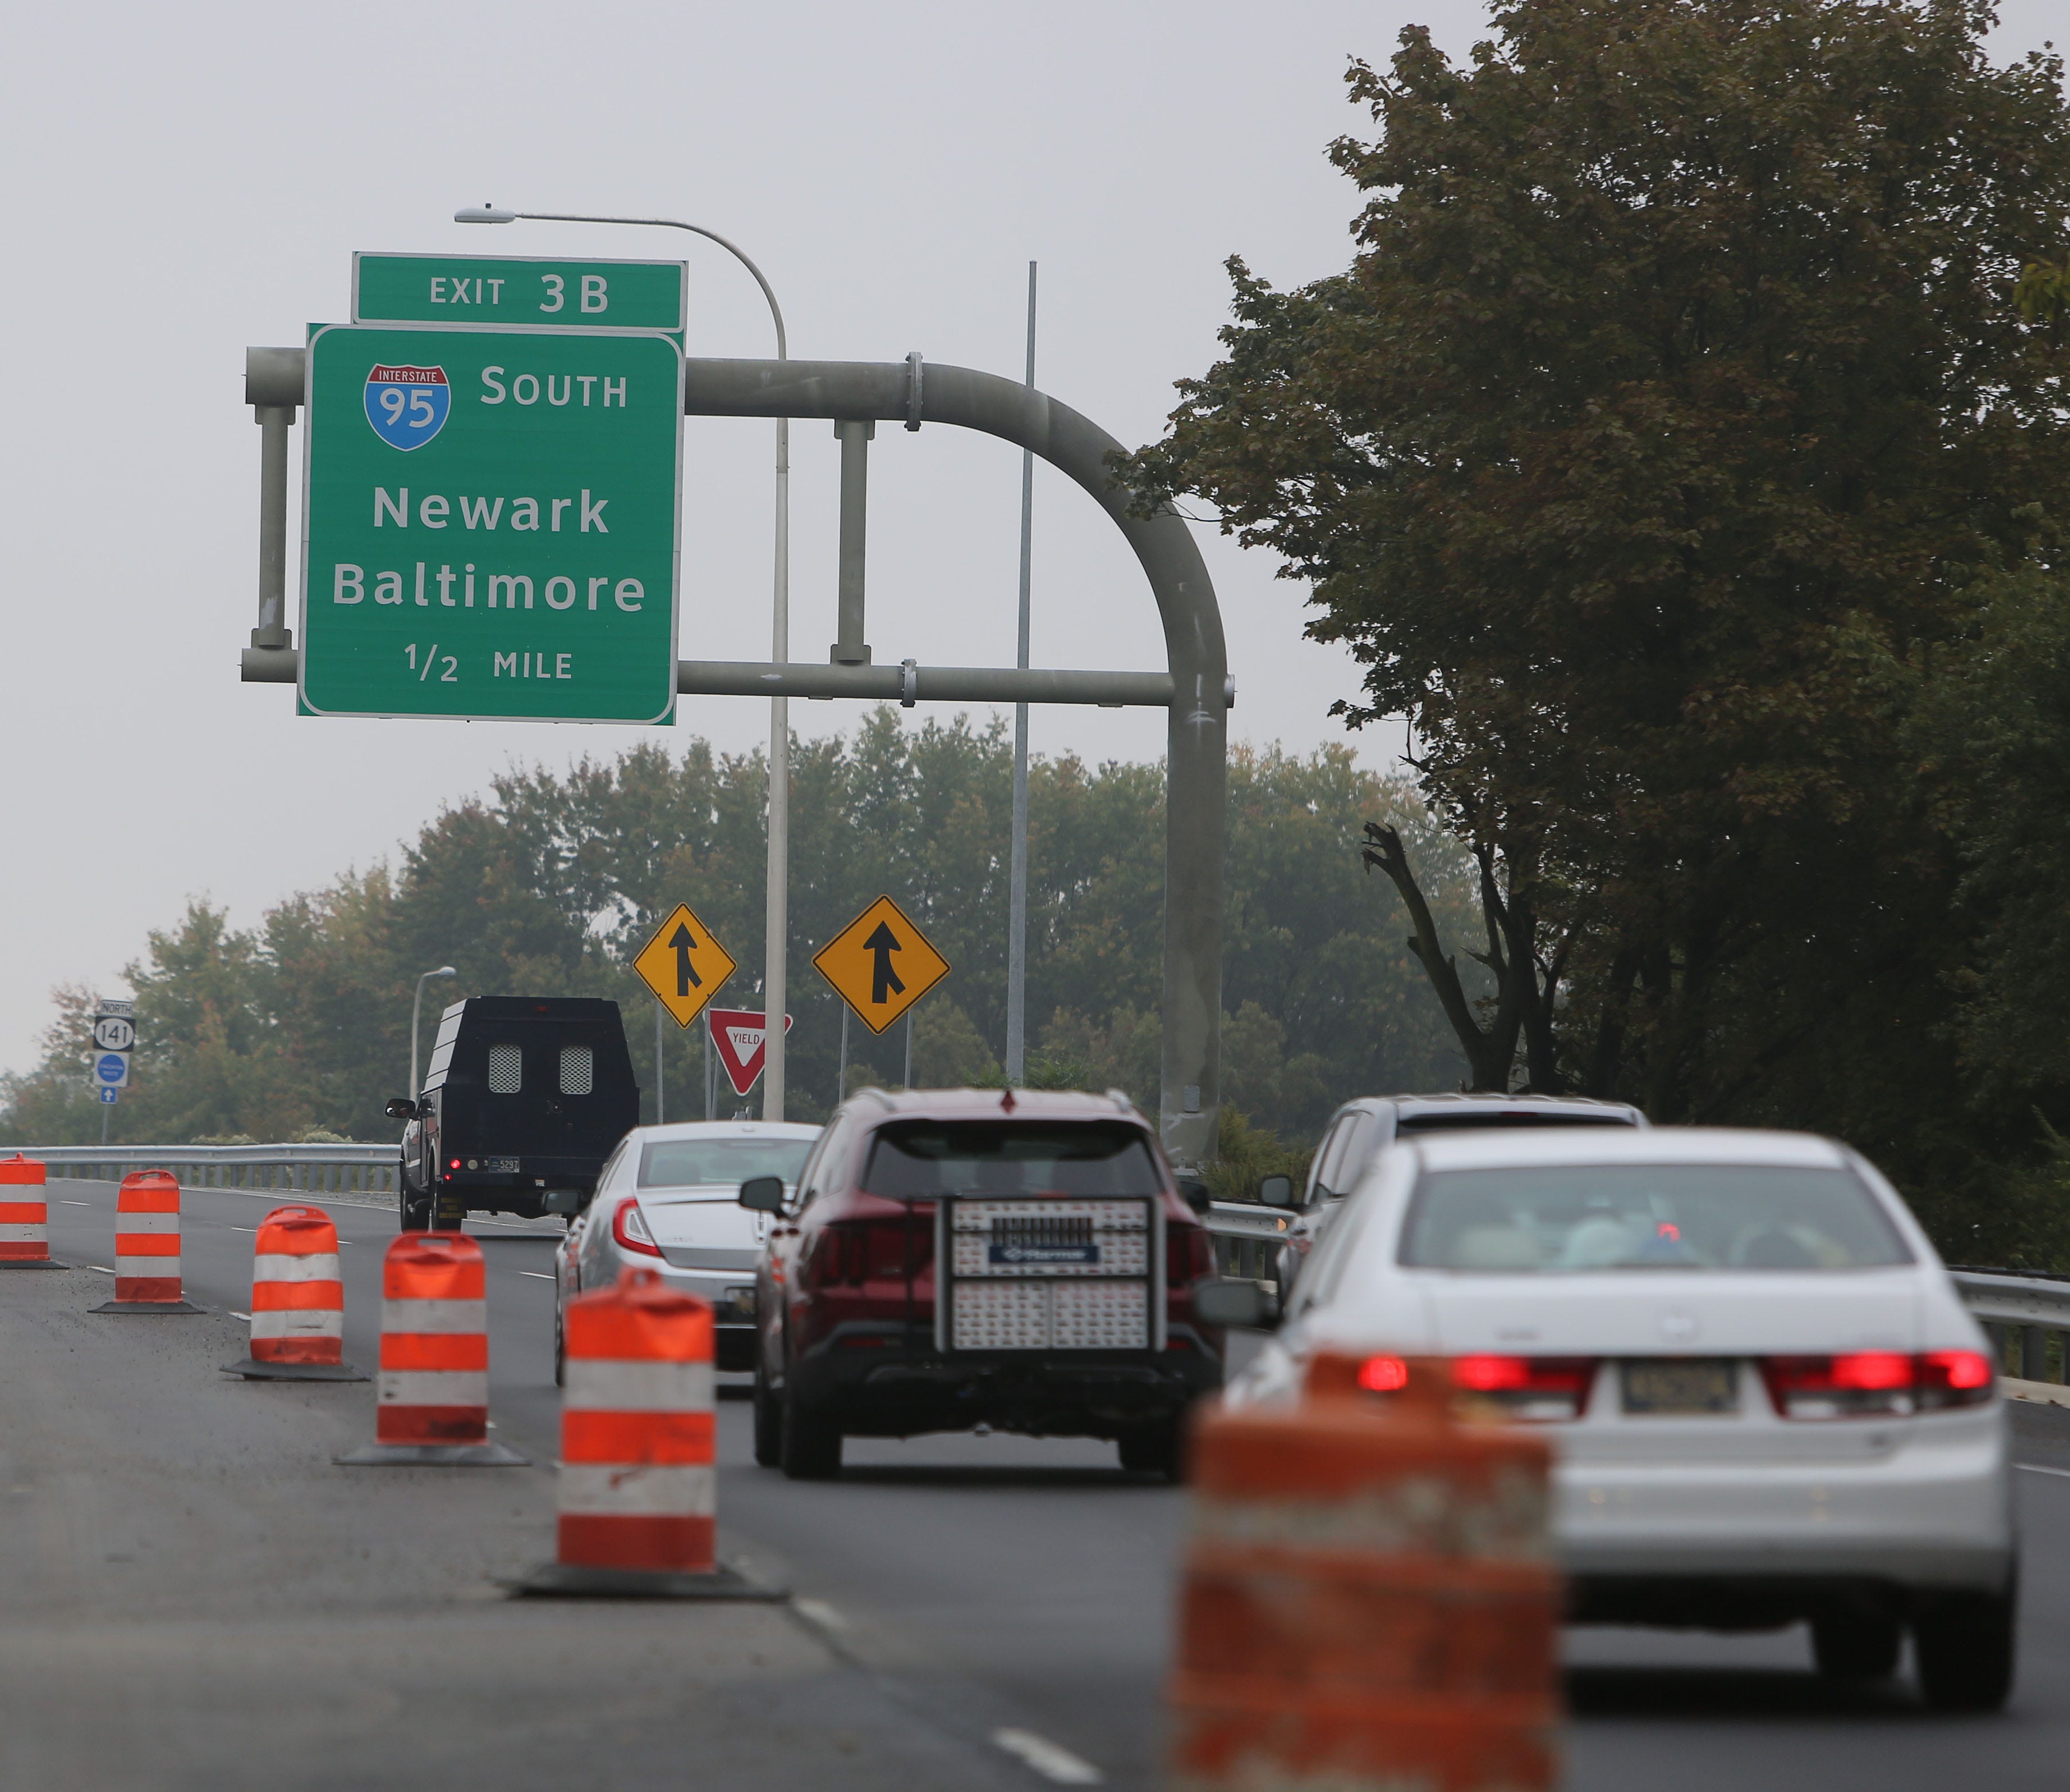 Road work ahead? Here's what you need to know.